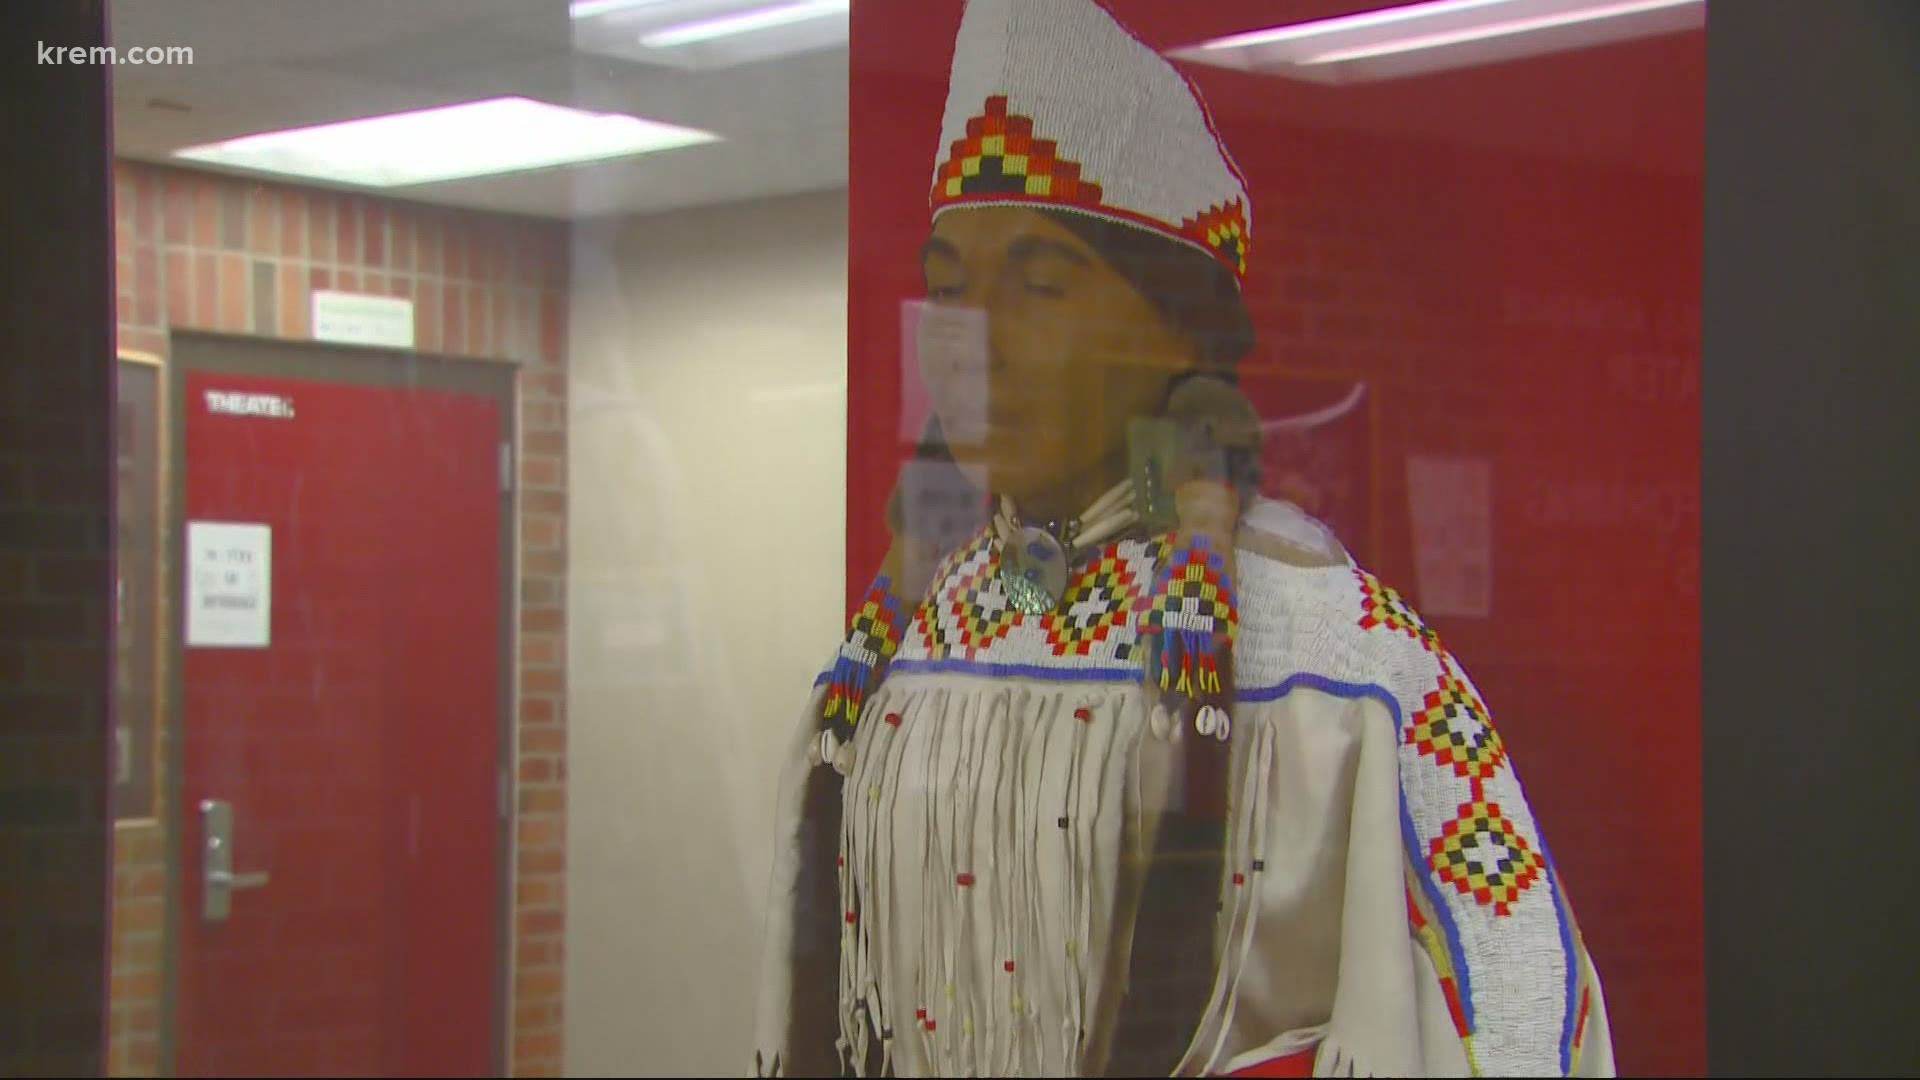 SPS will hold a public form to discuss changing the mascot at North Central high school following a state ban on the use of Native American mascots.